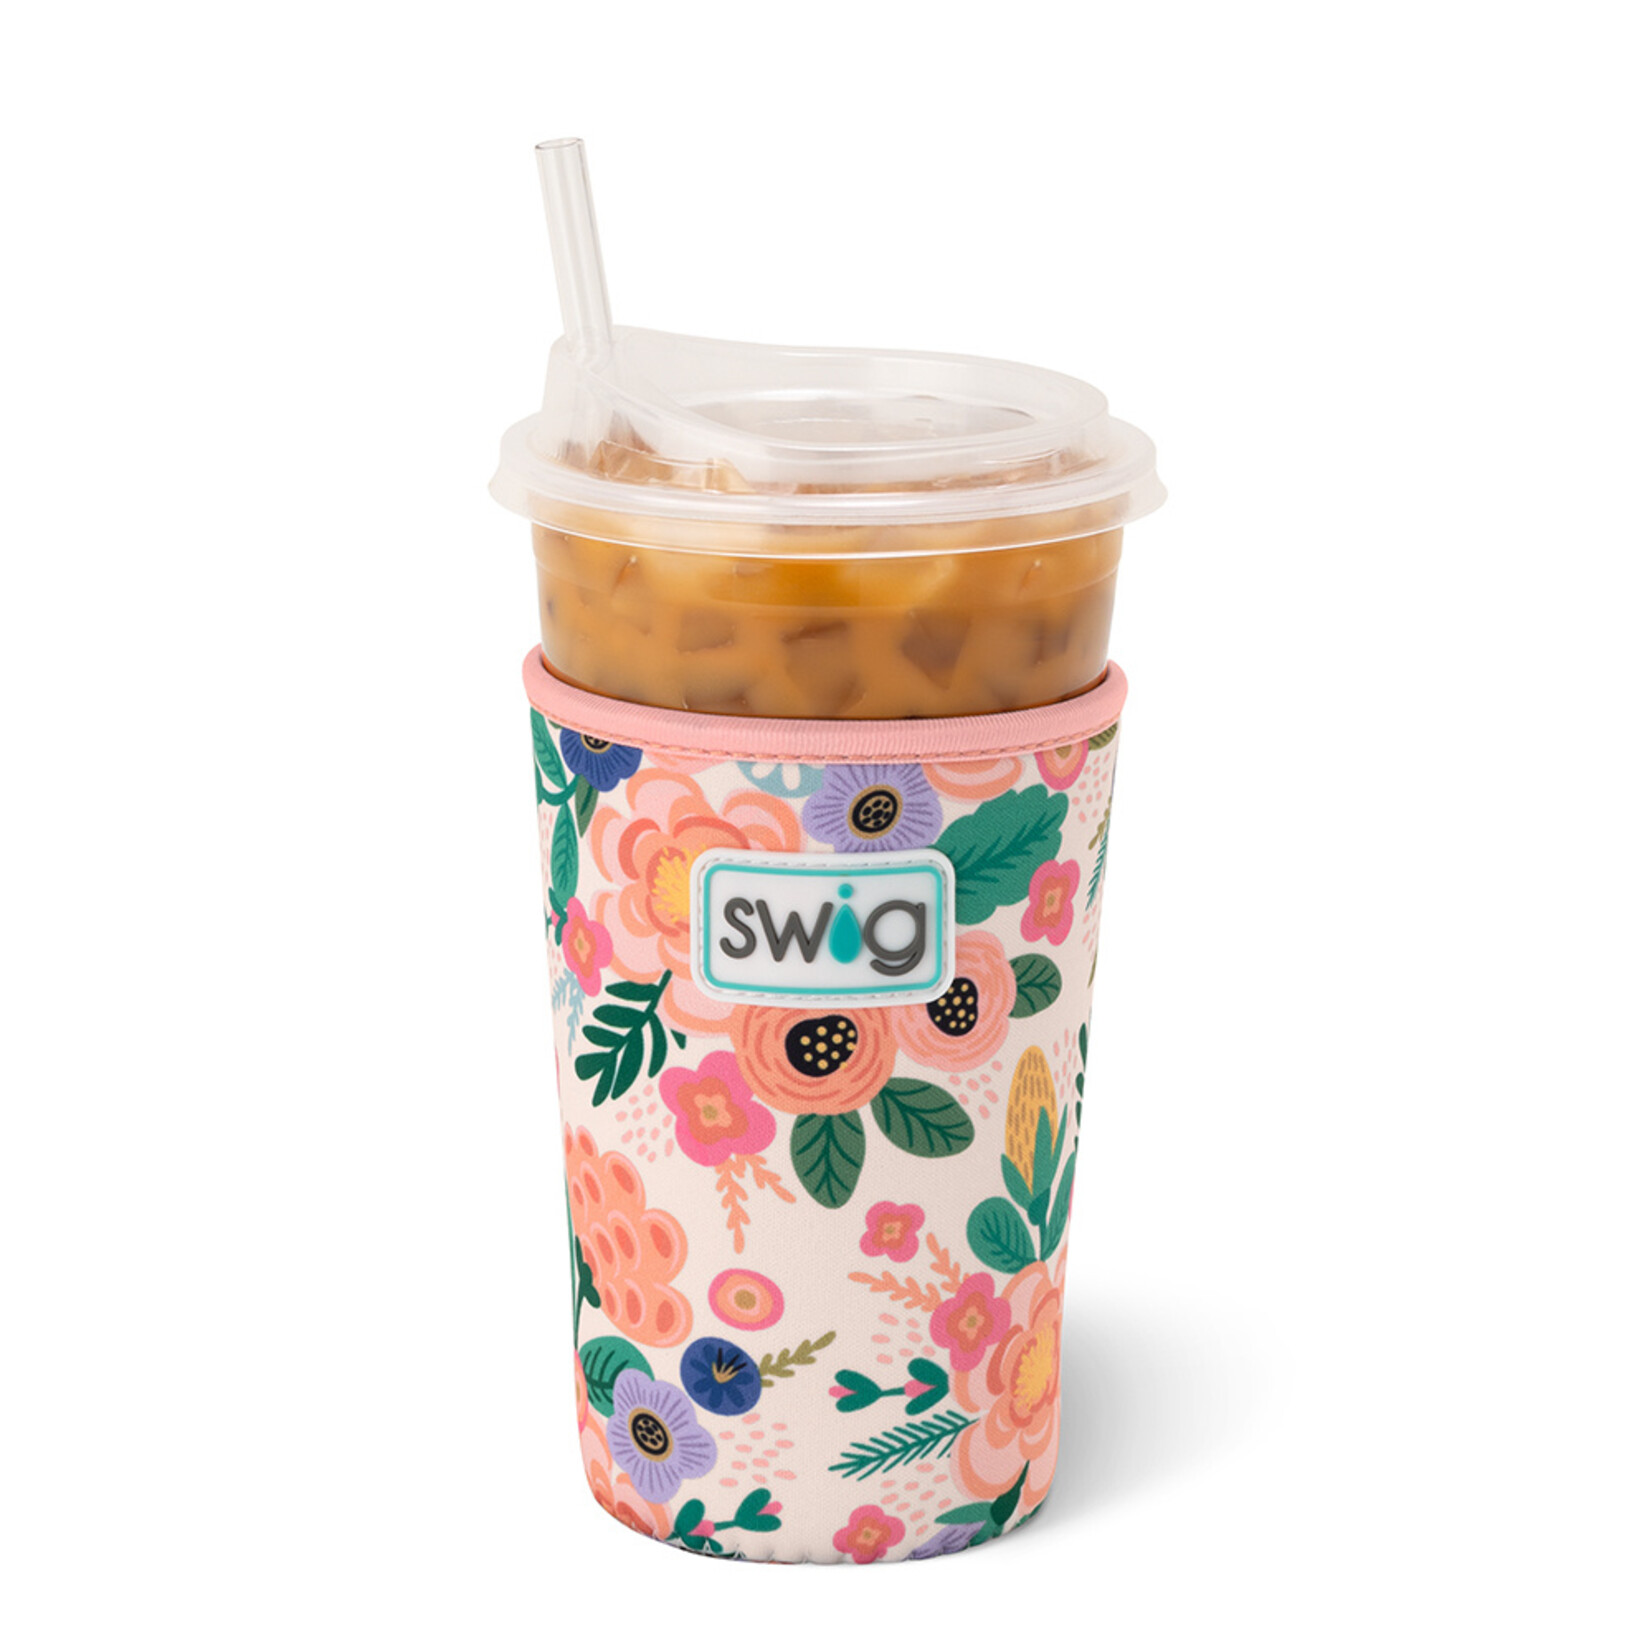 Swig Full Bloom Iced Cup Coolie 22oz